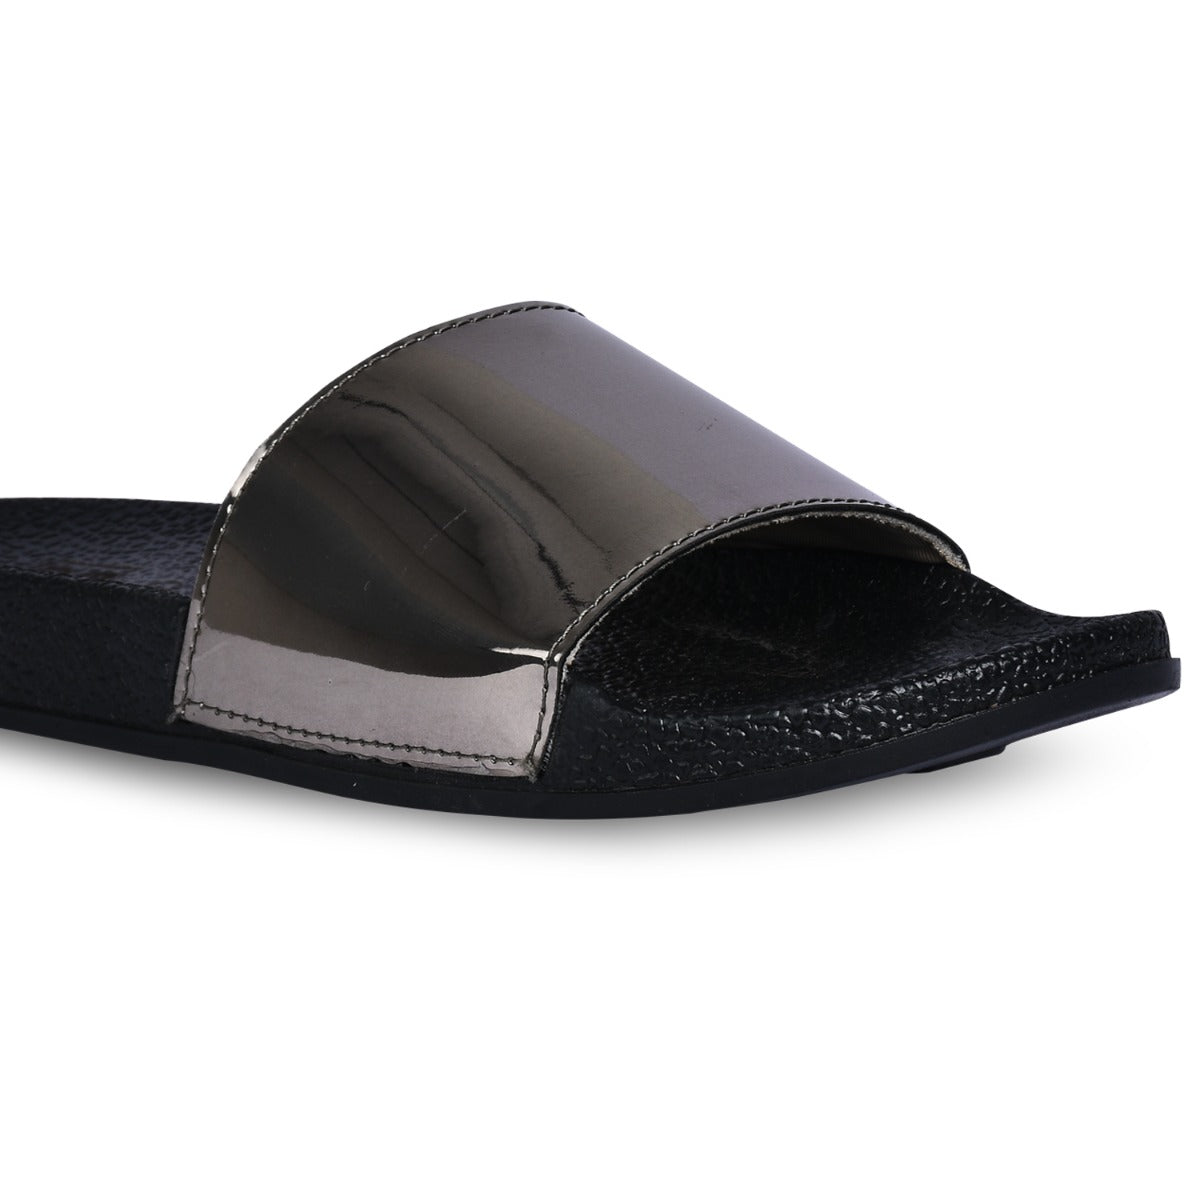 Paragon  K10907L Women Casual Slides | Stylish Sliders for Everyday Use for Ladies | Trendy &amp; Comfortable Slippers with Cushioned Soles